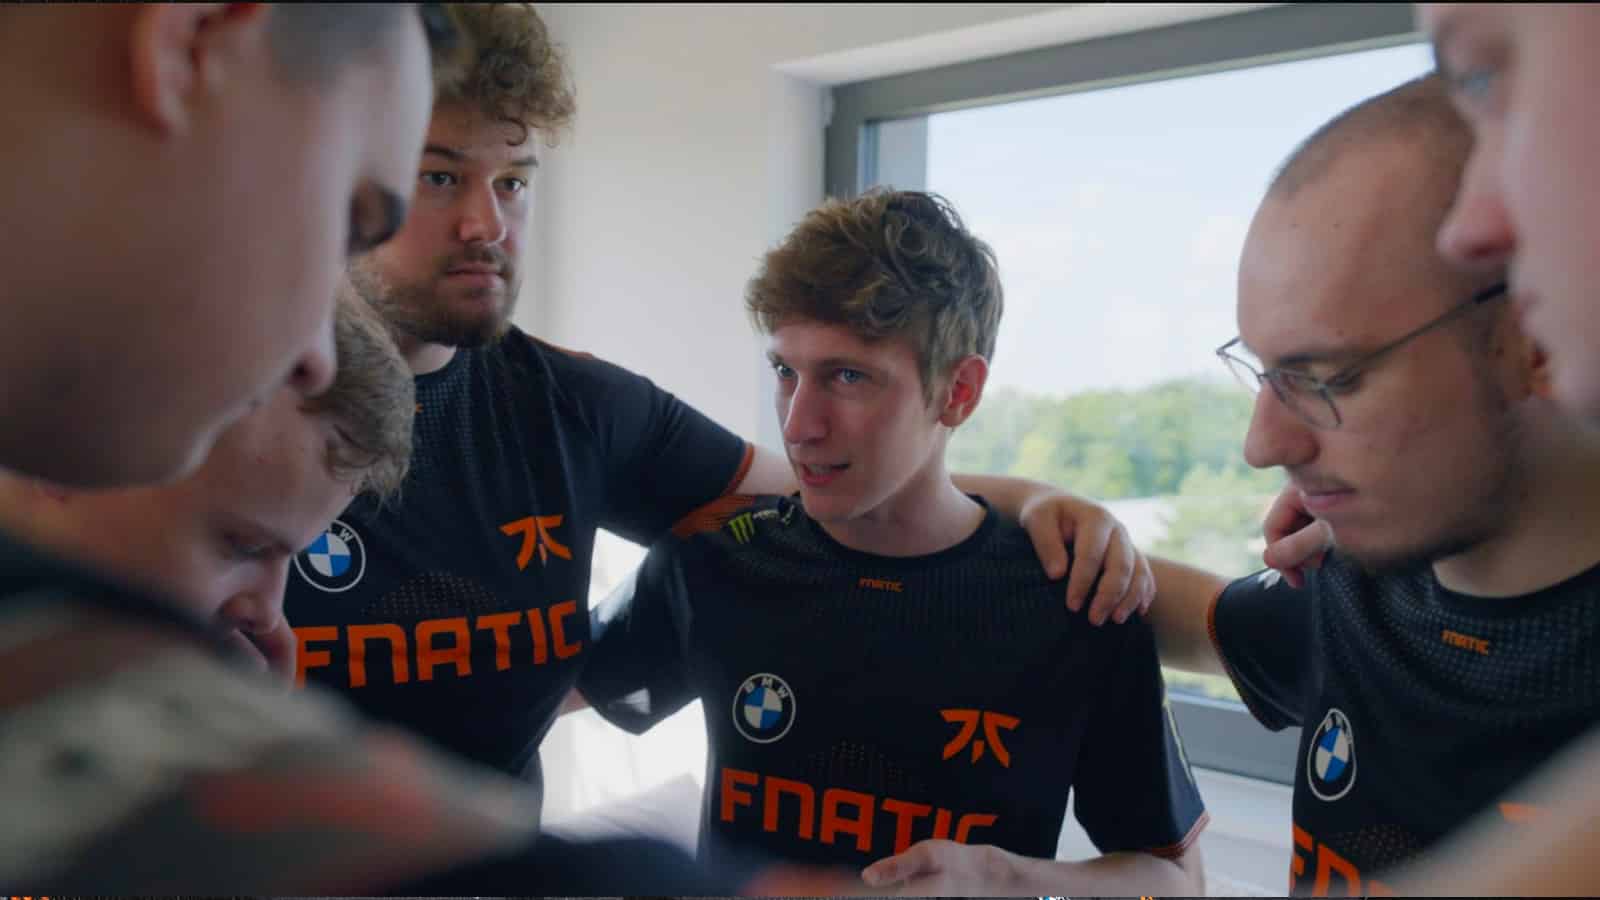 Boaster with Fnatic